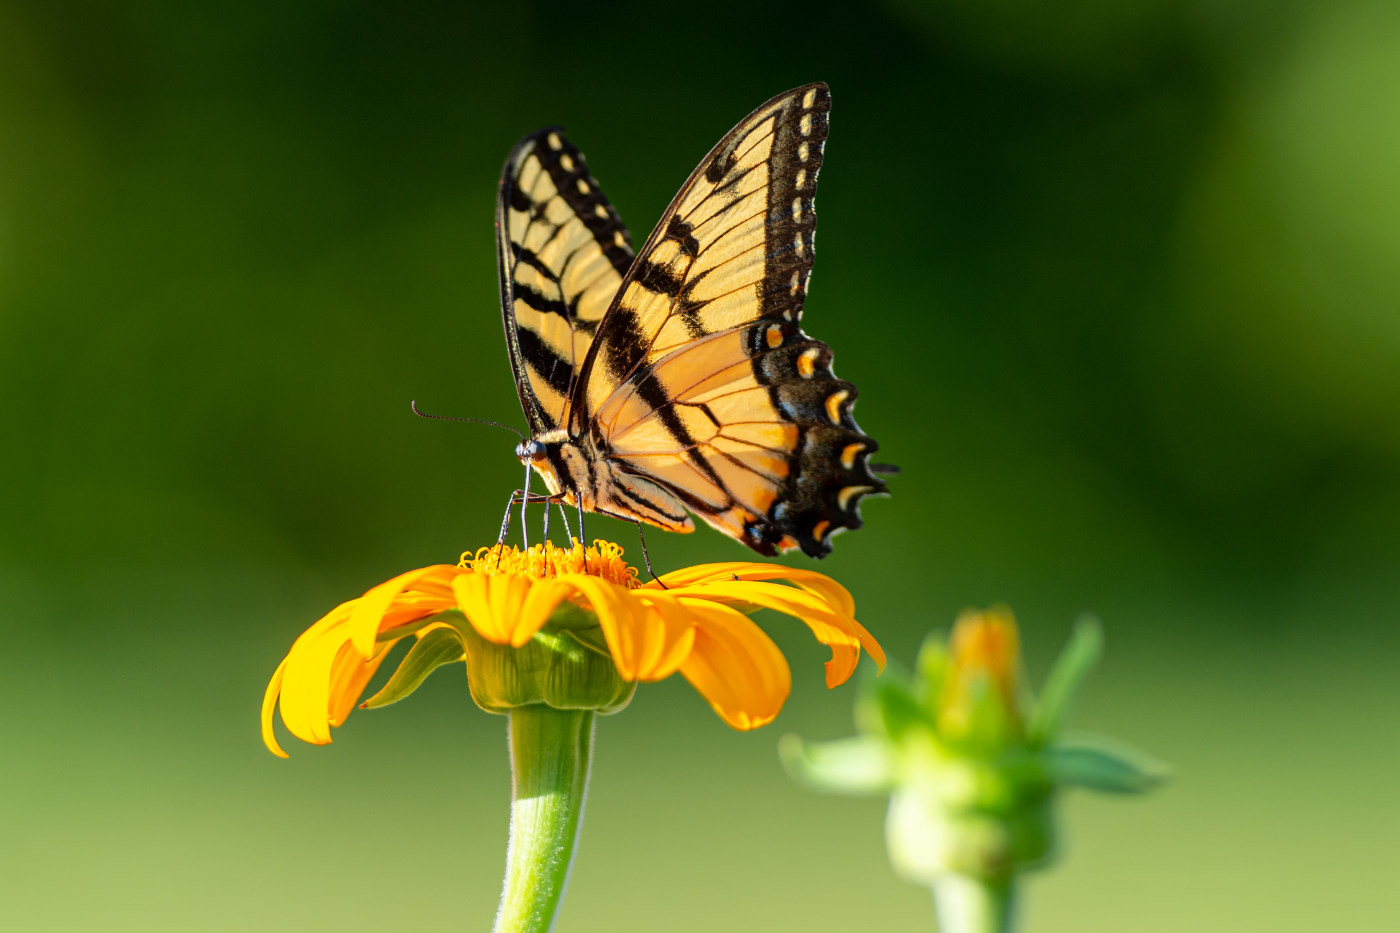 yellow and black butterfly, wings stretched out high, atop a yellow flower against blurred green background